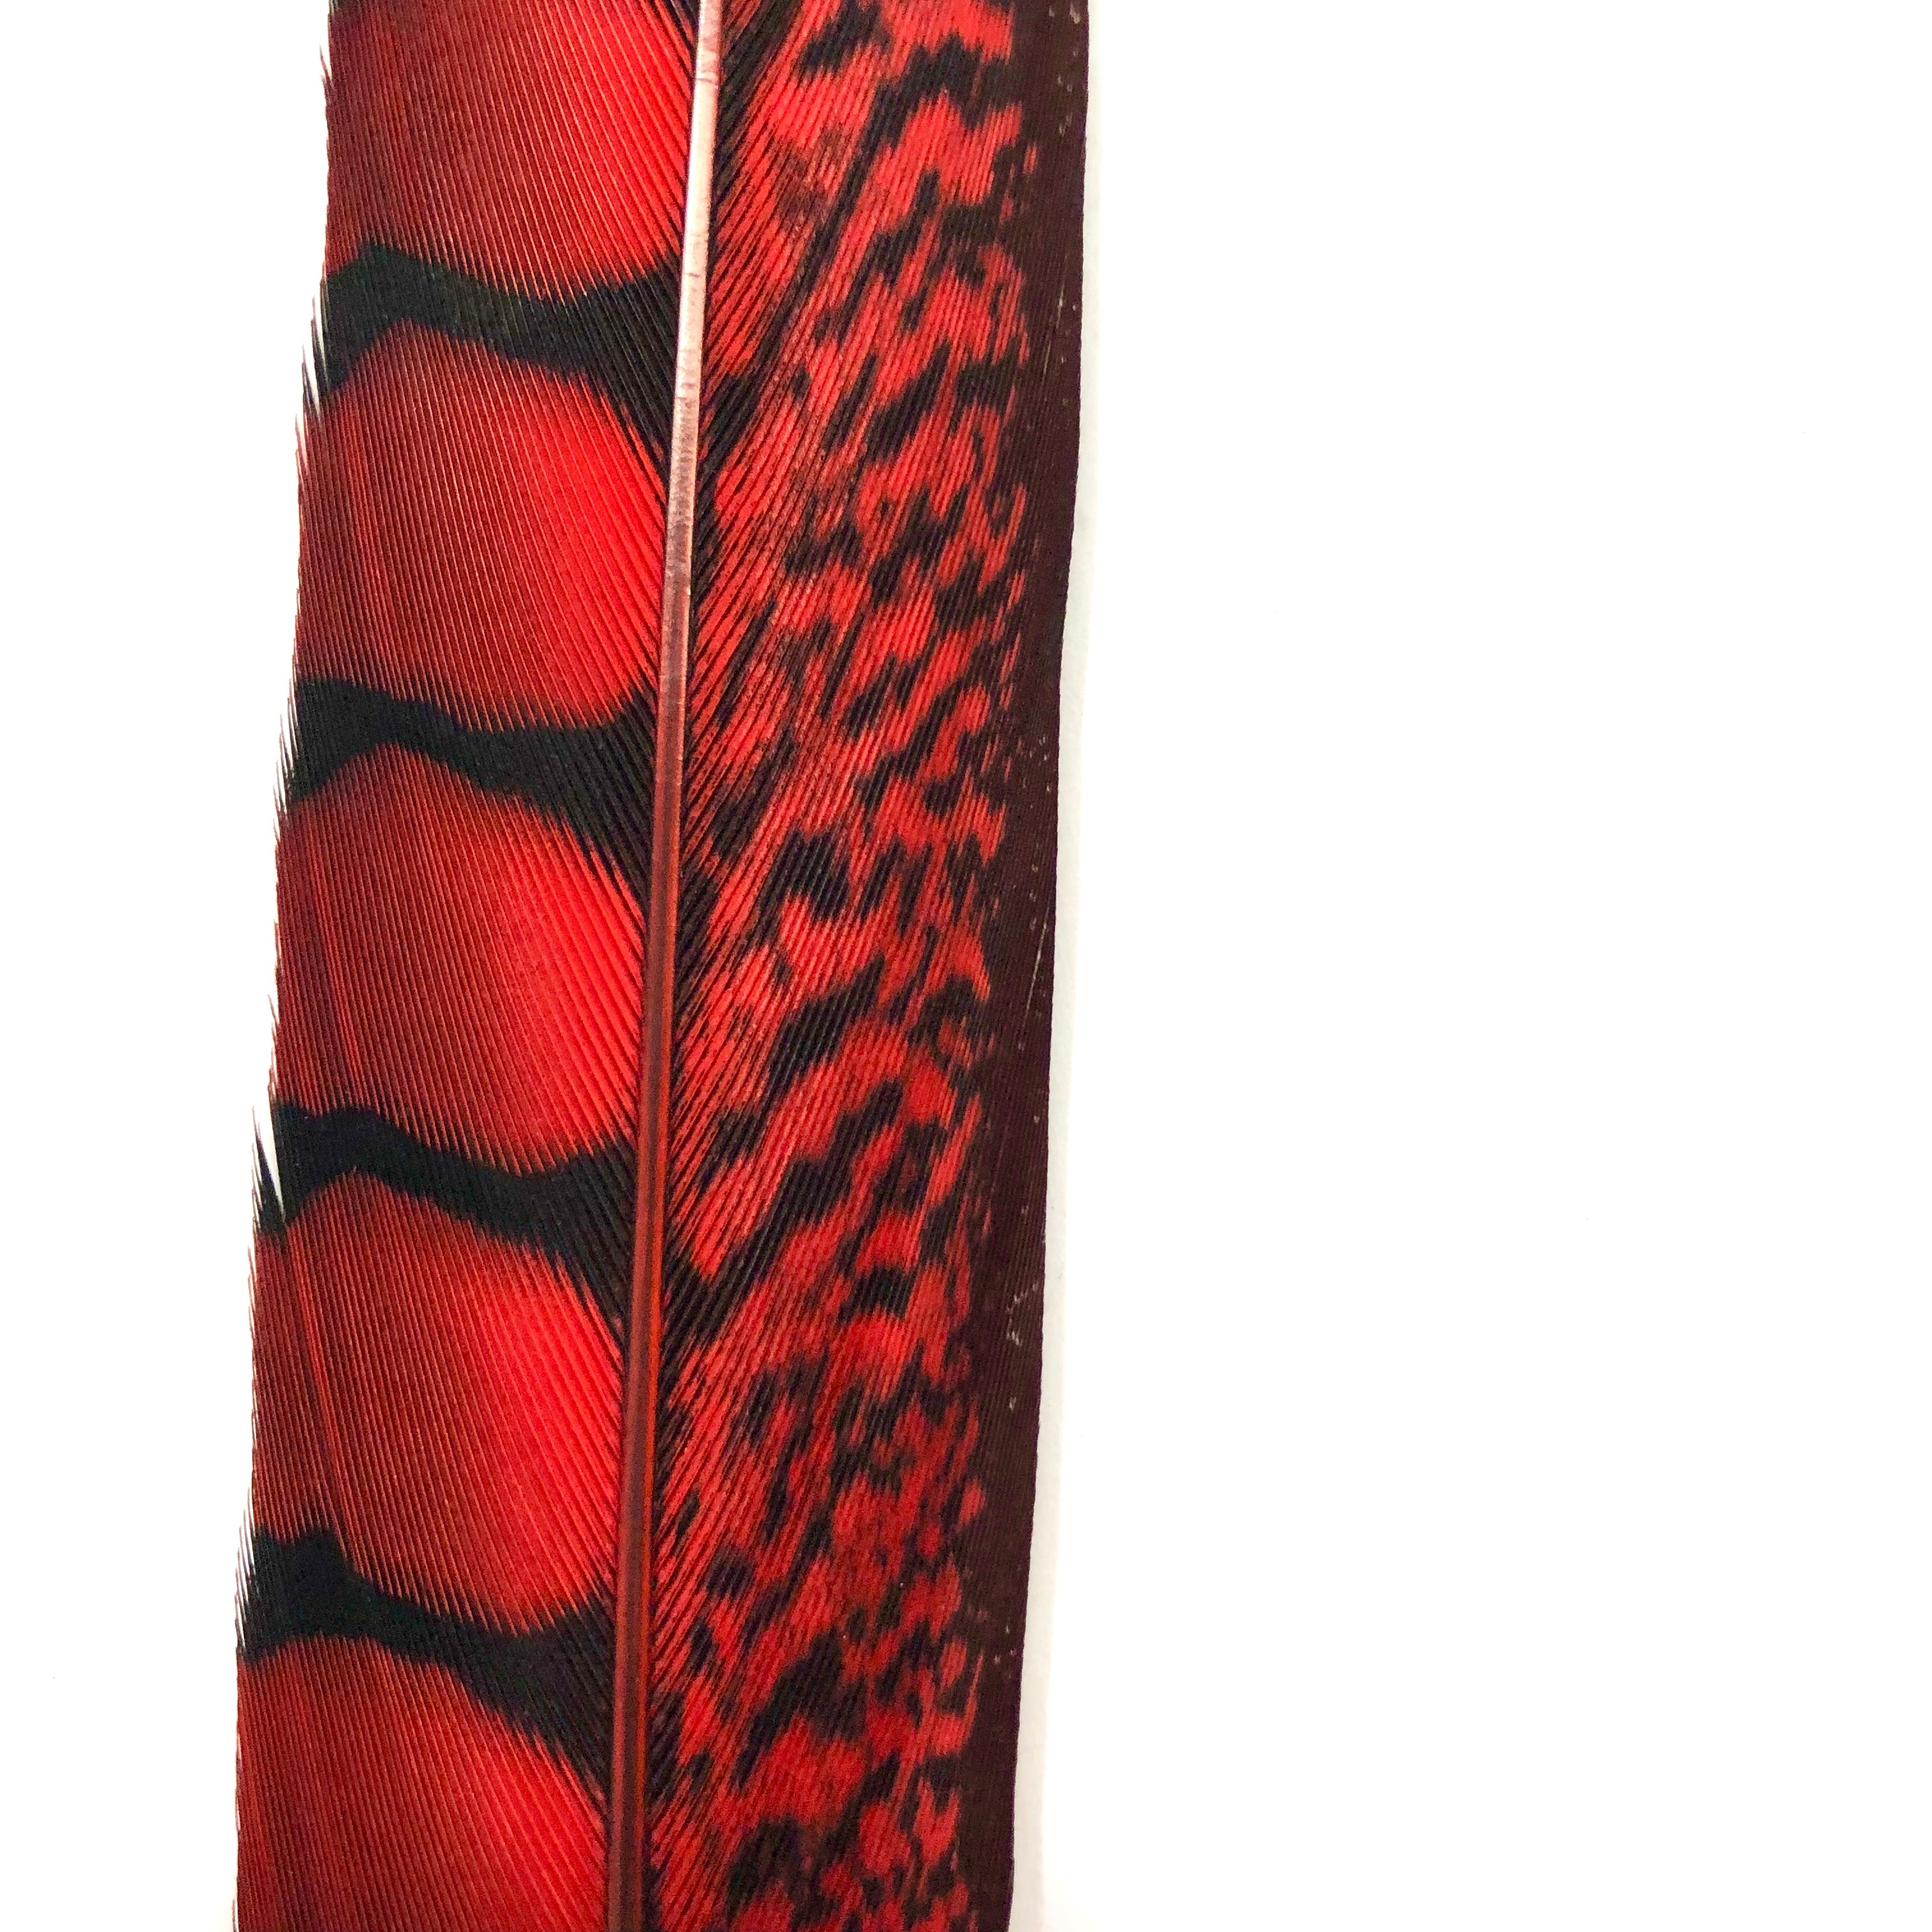 10" to 20" Lady Amherst Pheasant Side Tail Feather - Red